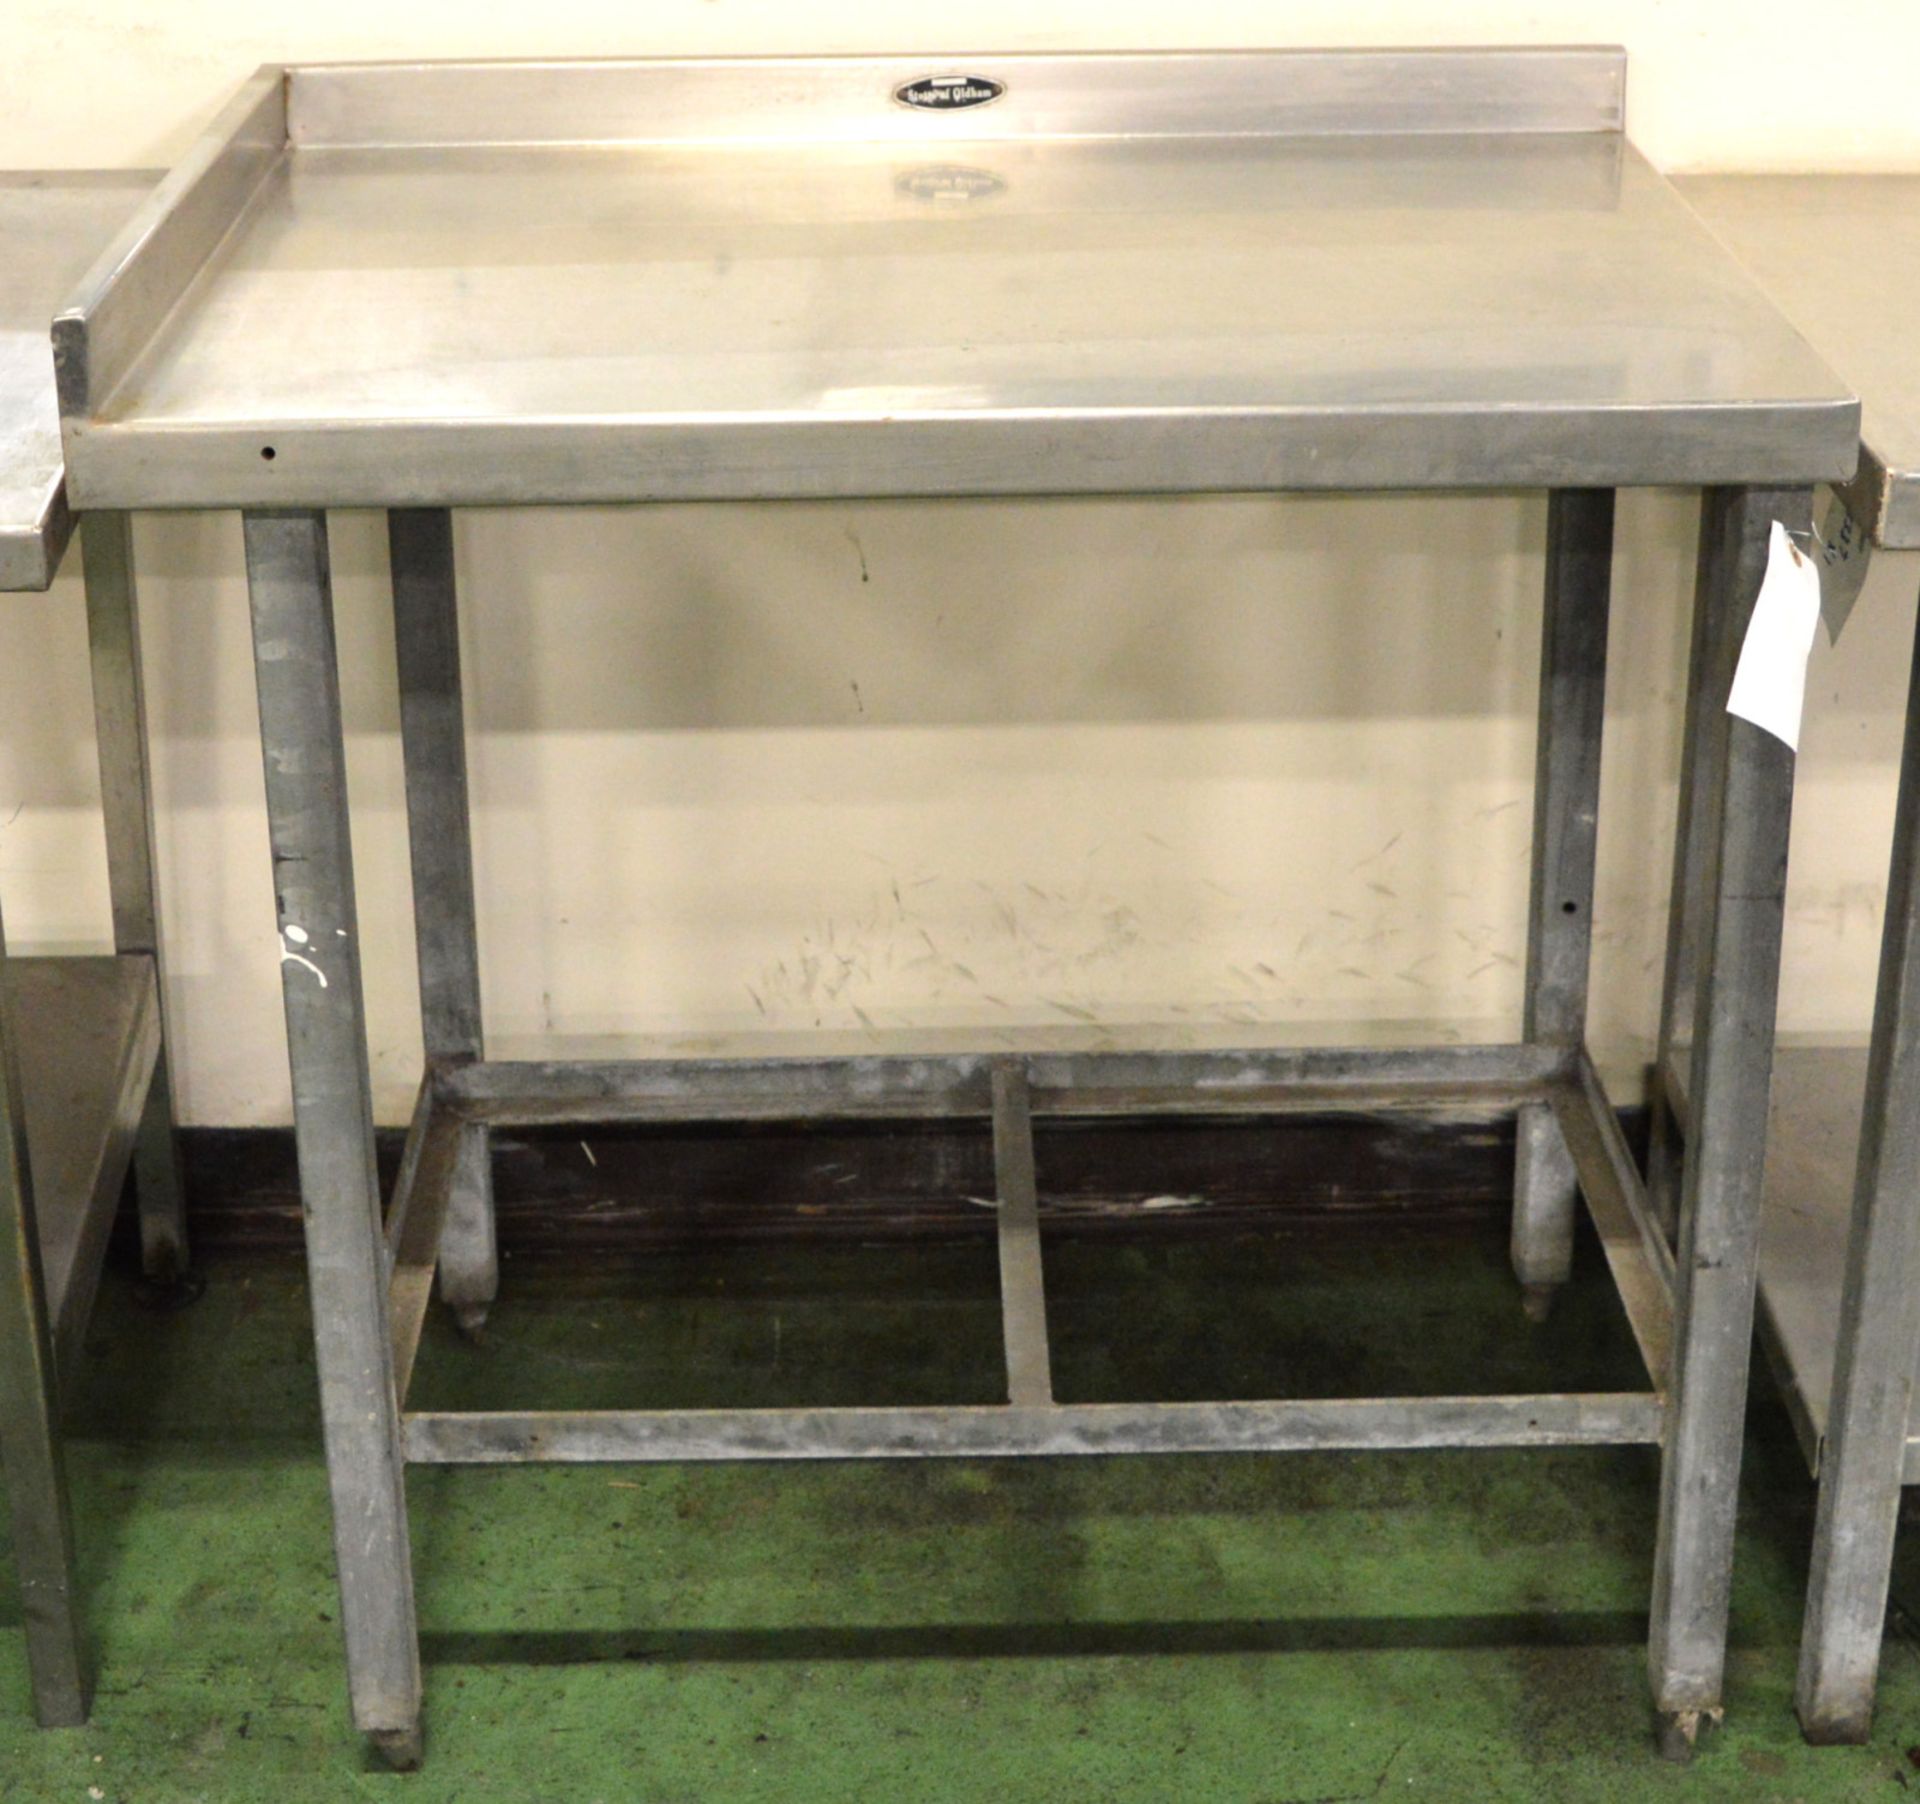 Stainless Steel Table 910mm x 610mm x 870mm high.